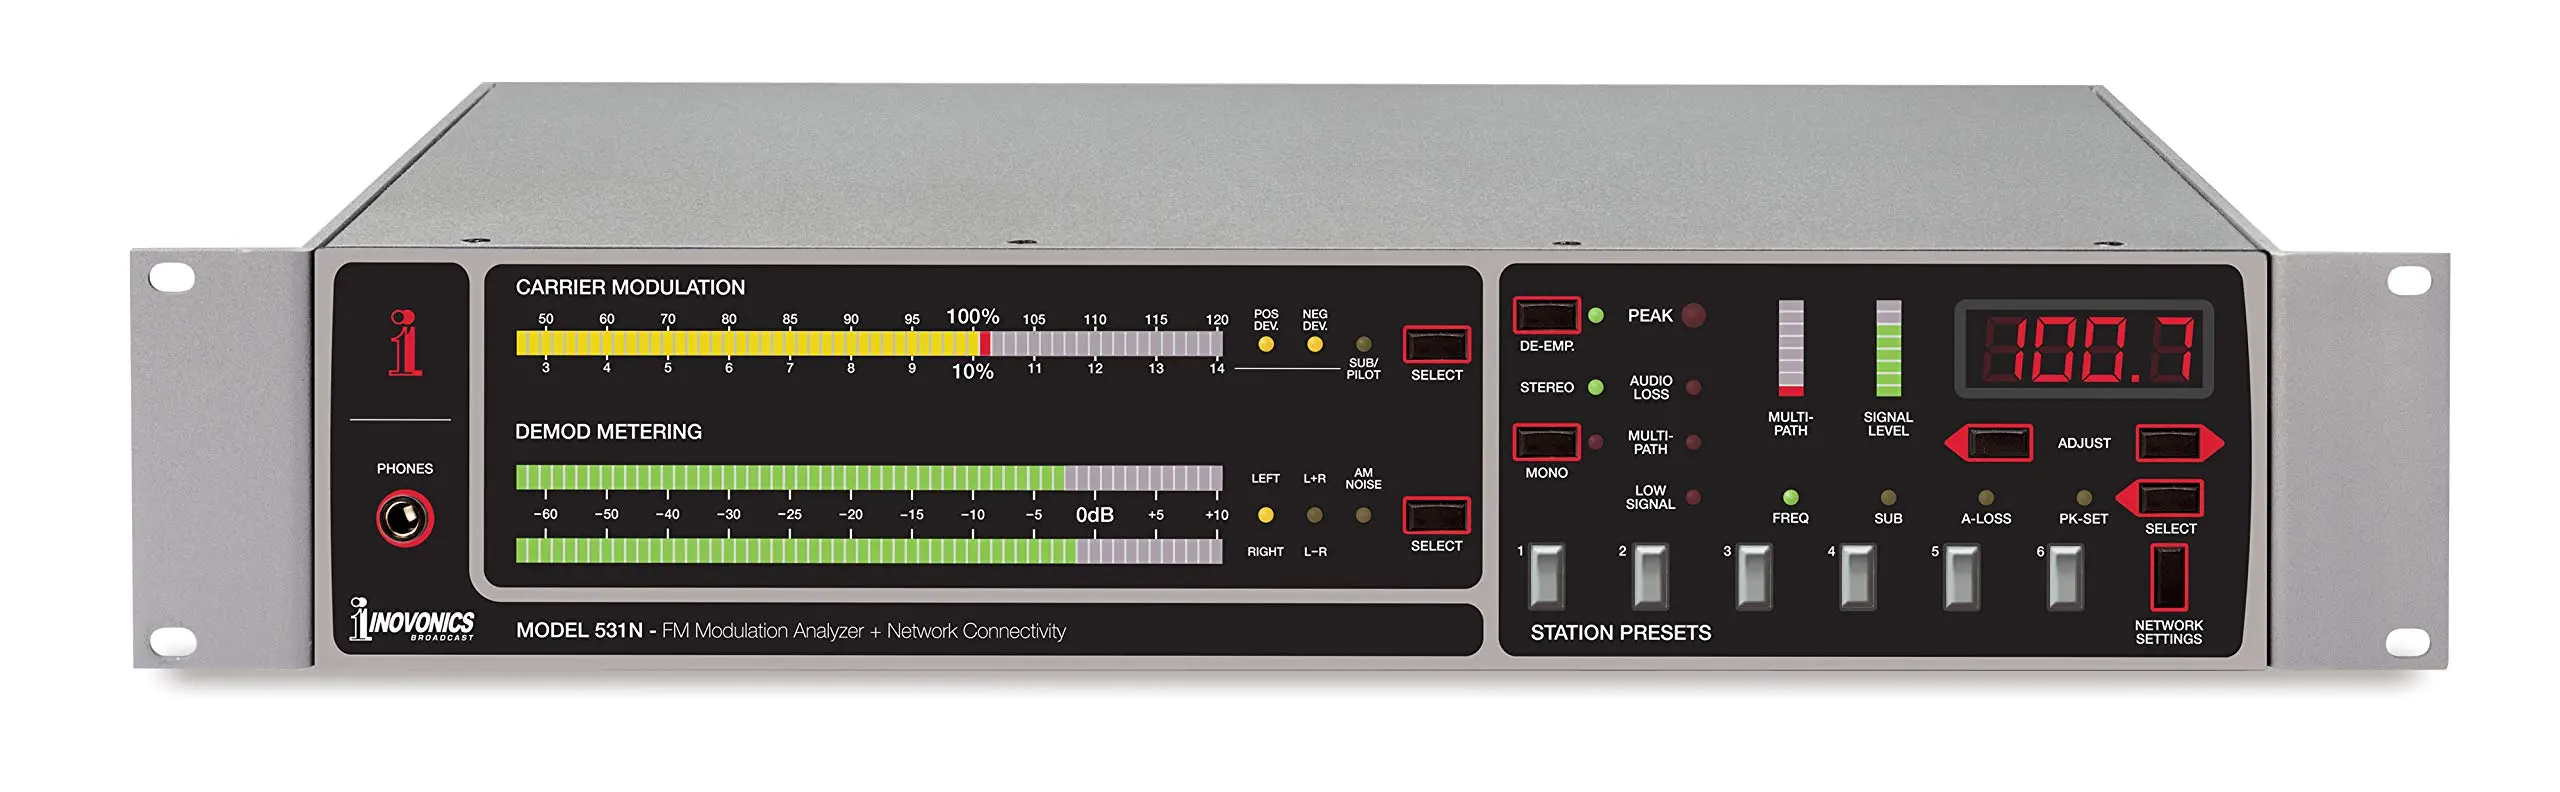 hewlett packard fm modulation monitor - What is the frequency meter of HP 5210A